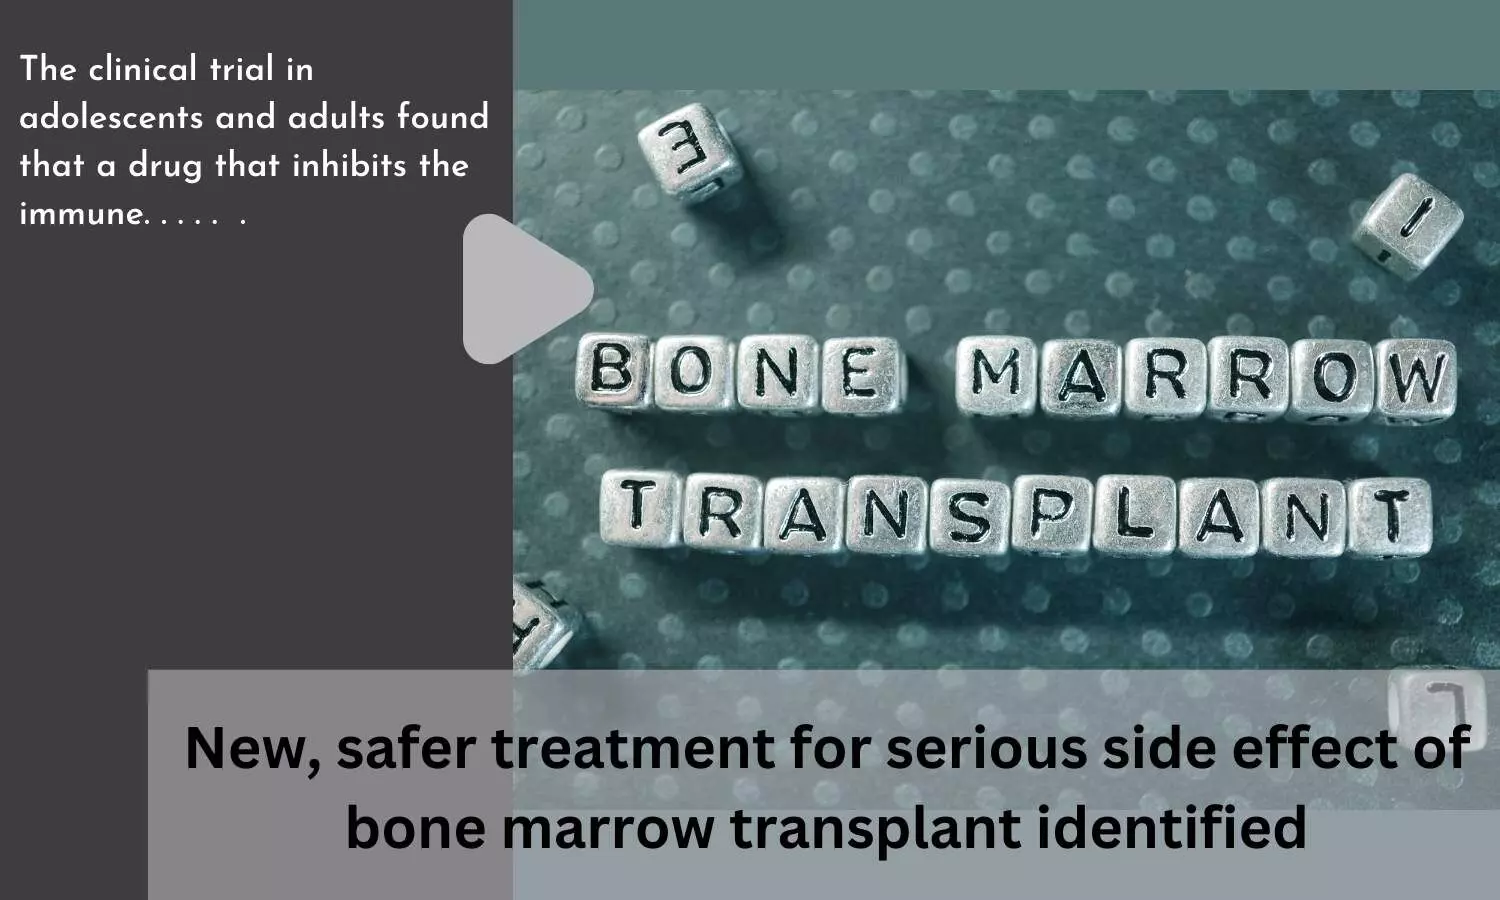 New, safer treatment for serious side effect of bone marrow transplant identified